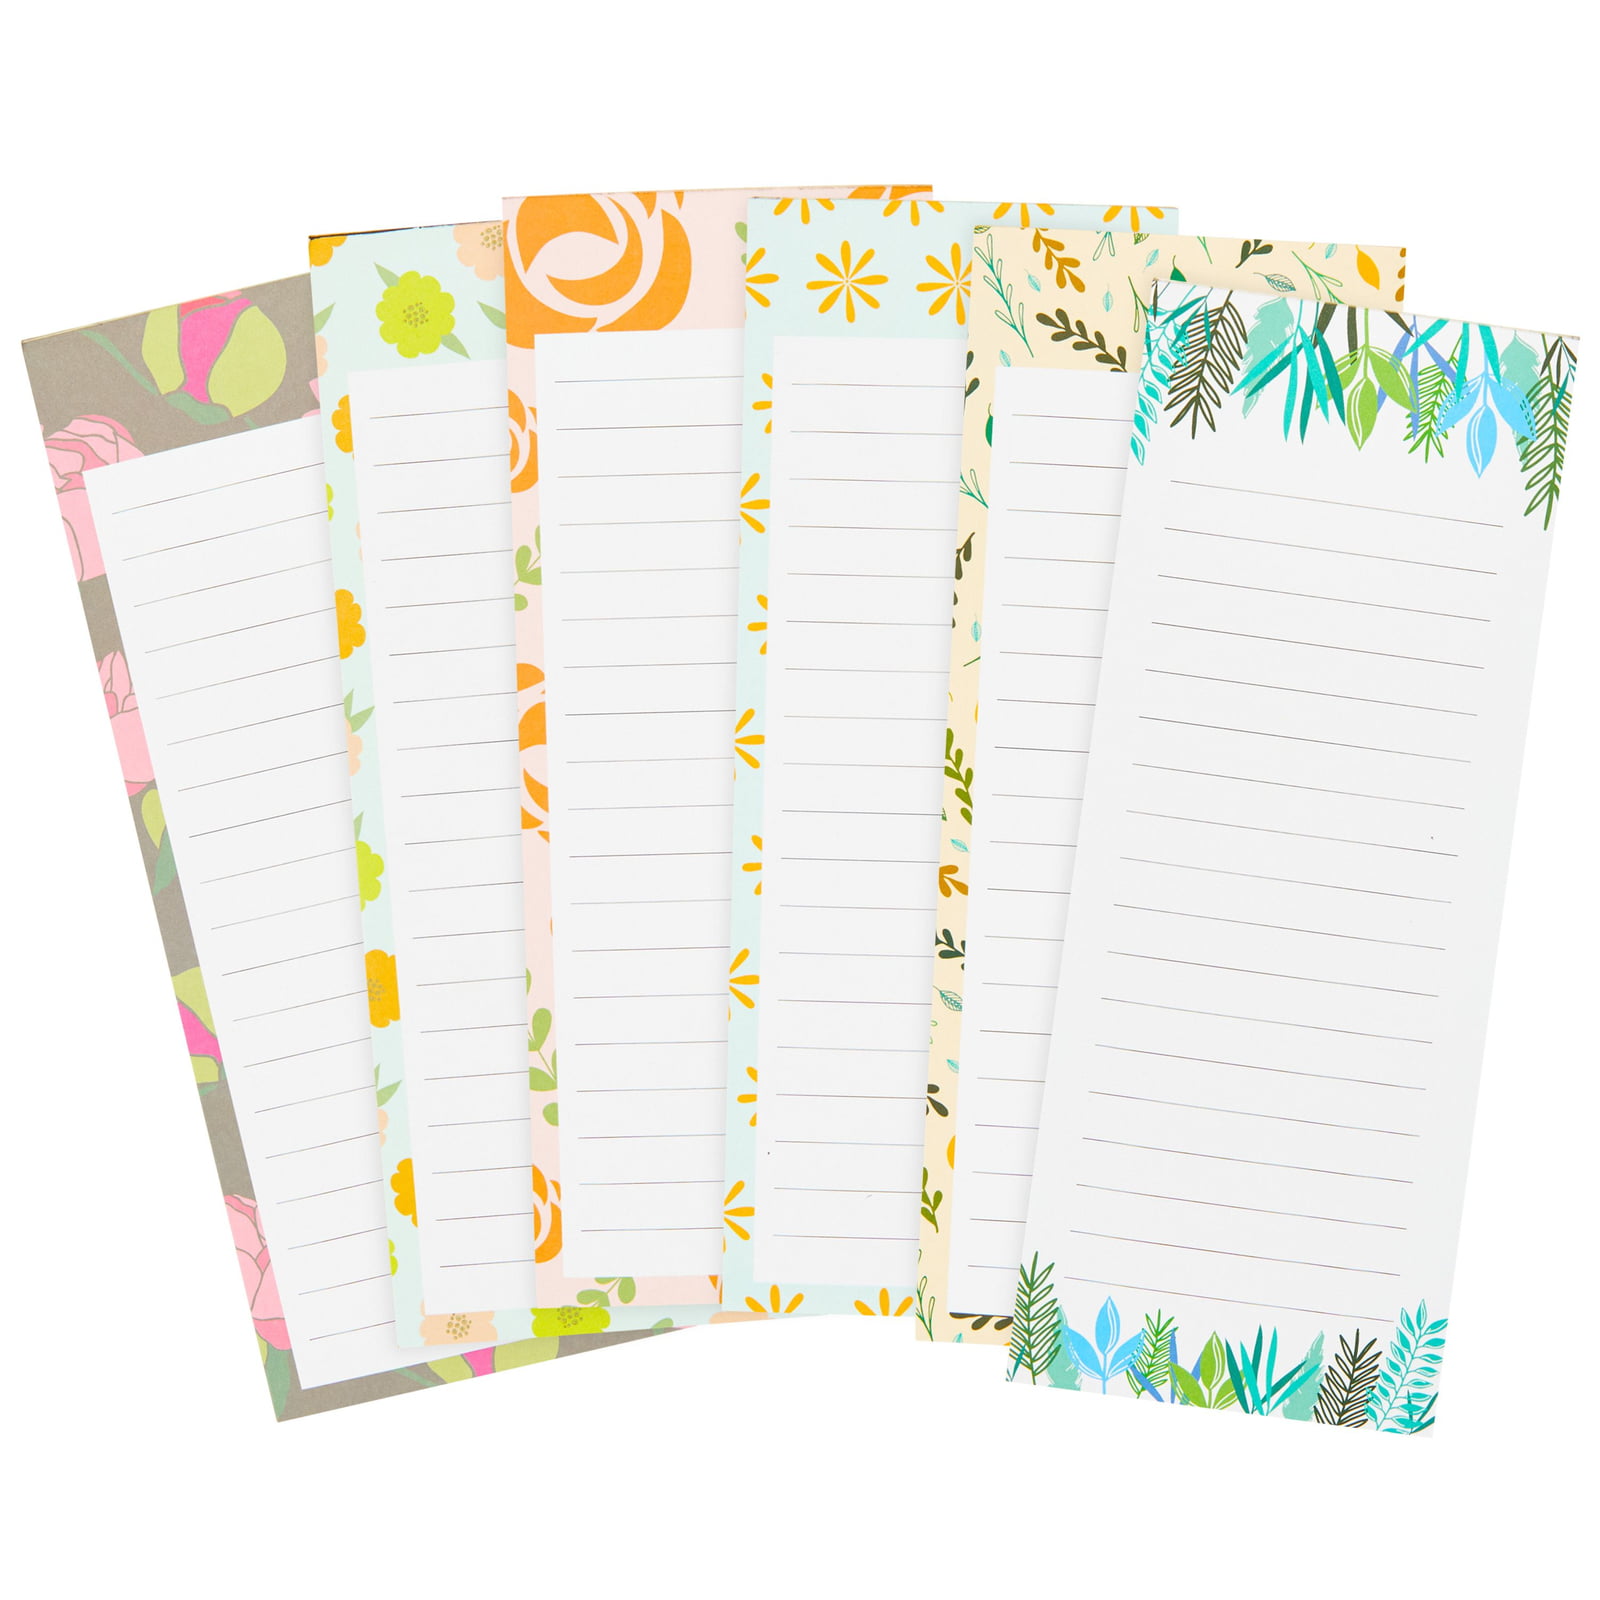 Grocery List Magnet Pad for Fridge 6-Pack Magnetic Note Pads Lists 6 Pastel Geometric Patterns 60 Sheets Per Pad Full Magnet Back to-Do-List Notepads